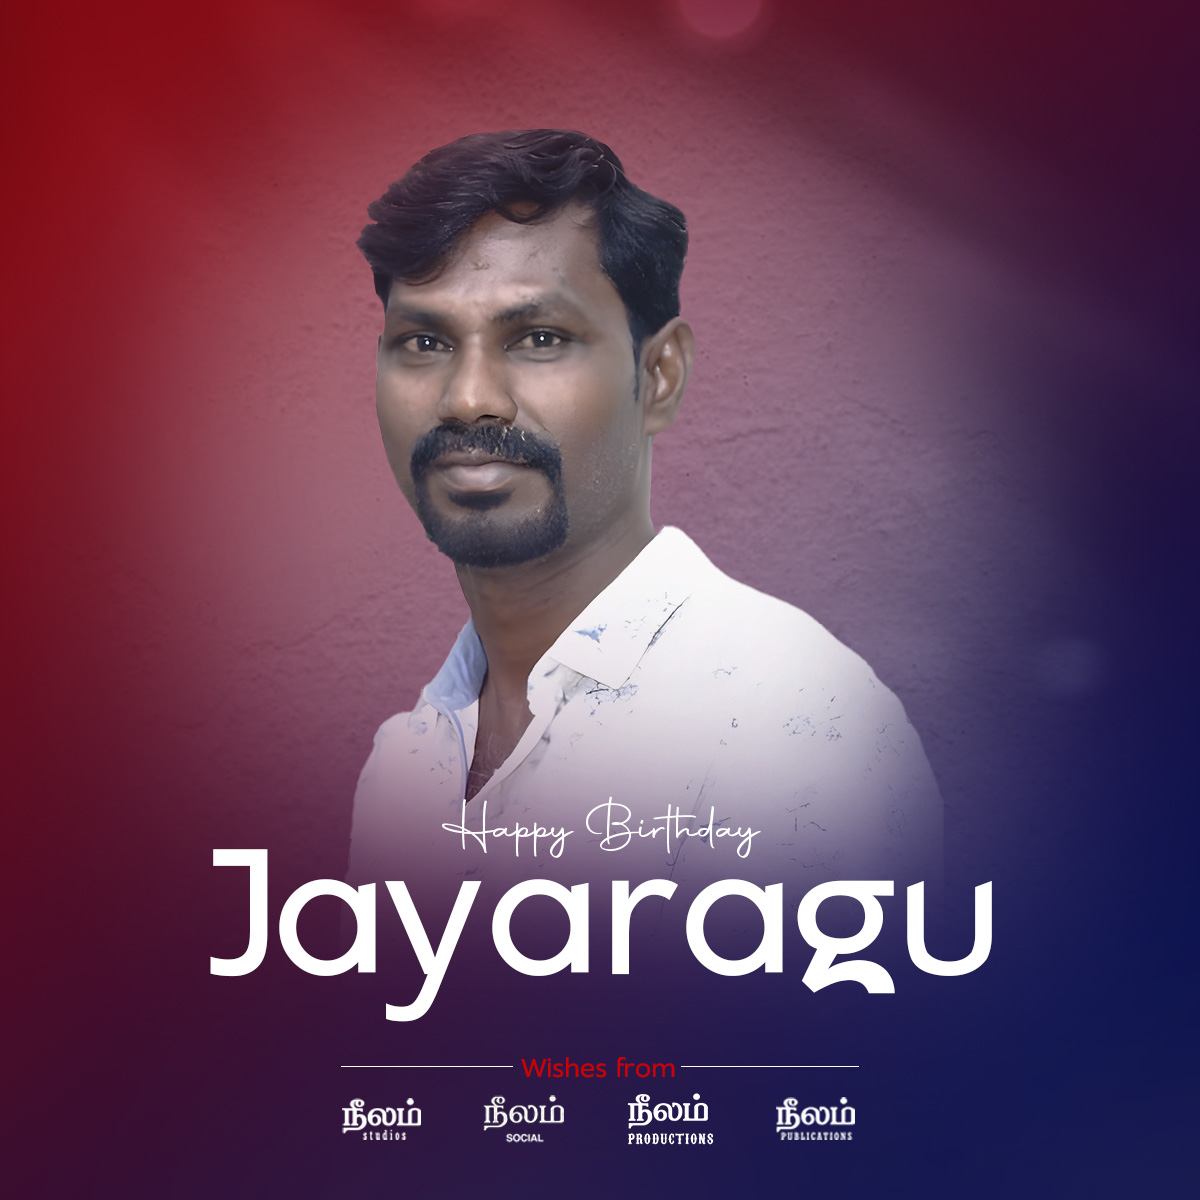 Wishing our meticulous and craftsy designer @Jayaraguart a year filled with joy, peace and incredible projects 🥰 #HBDJayaragu